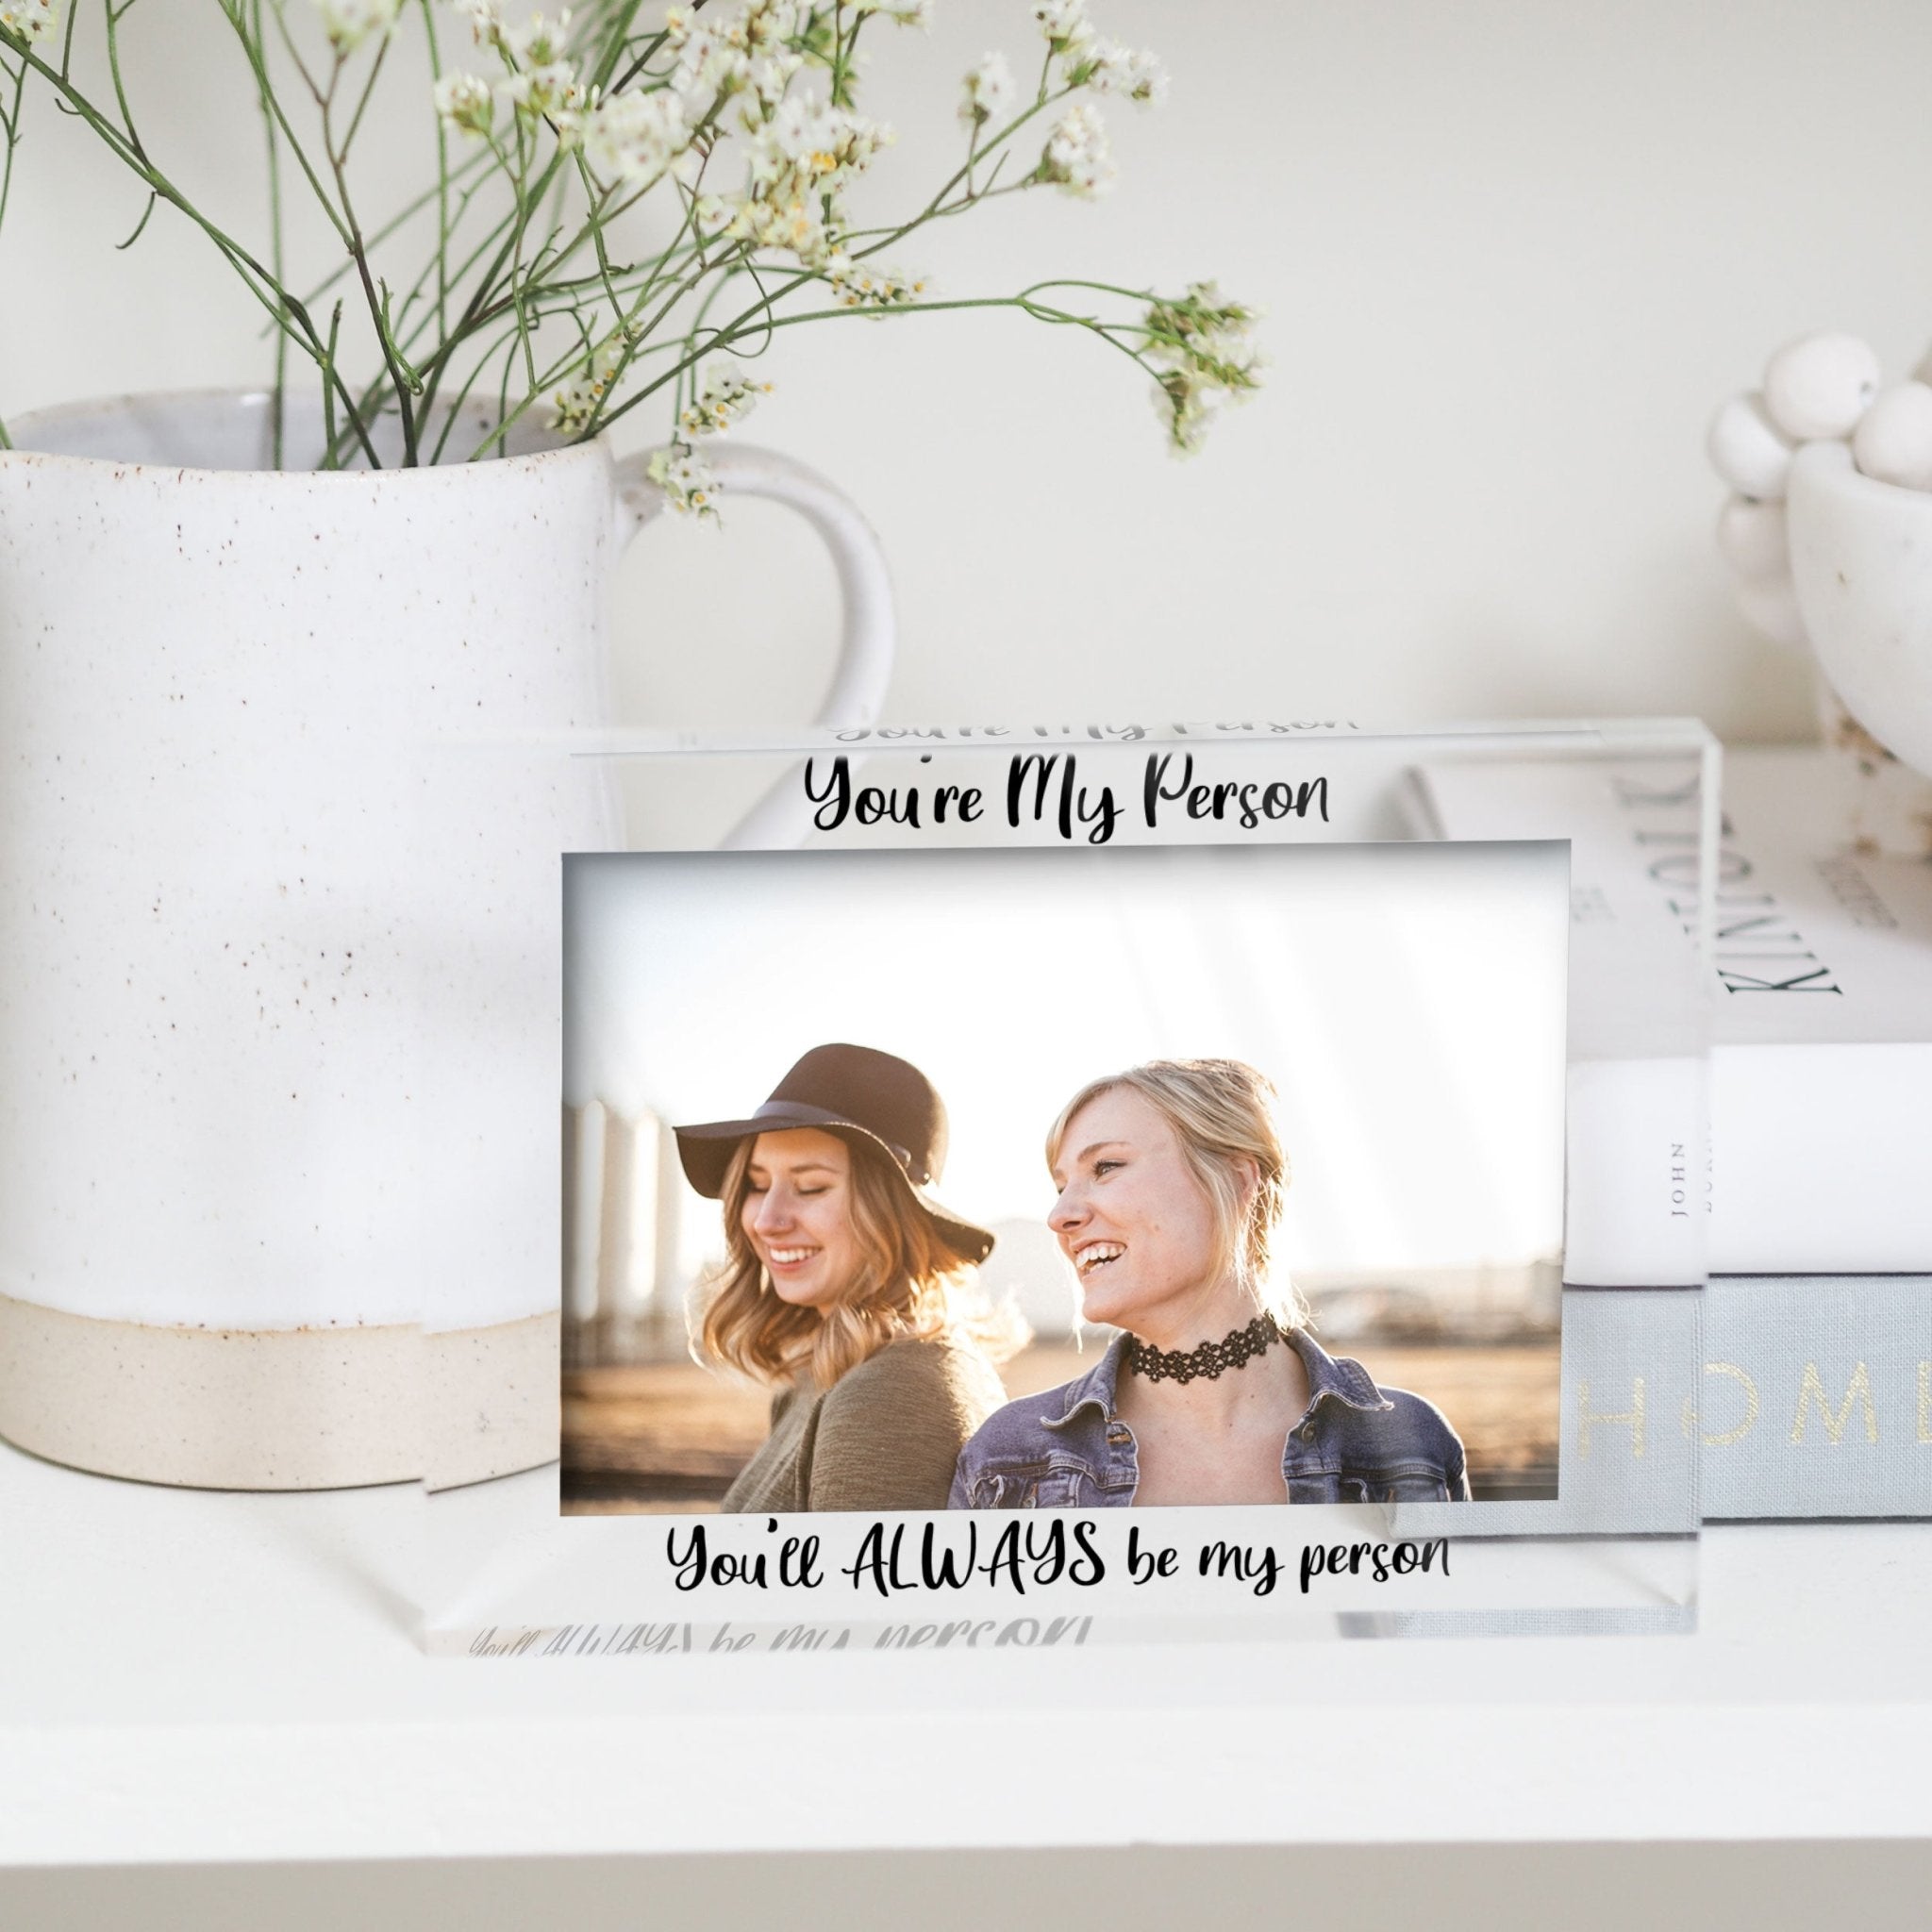 You're My Person | Custom Photo Frame For Best Friend | Best Friend Photo | Picture Frame For Friend PhotoBlock - Unique Prints